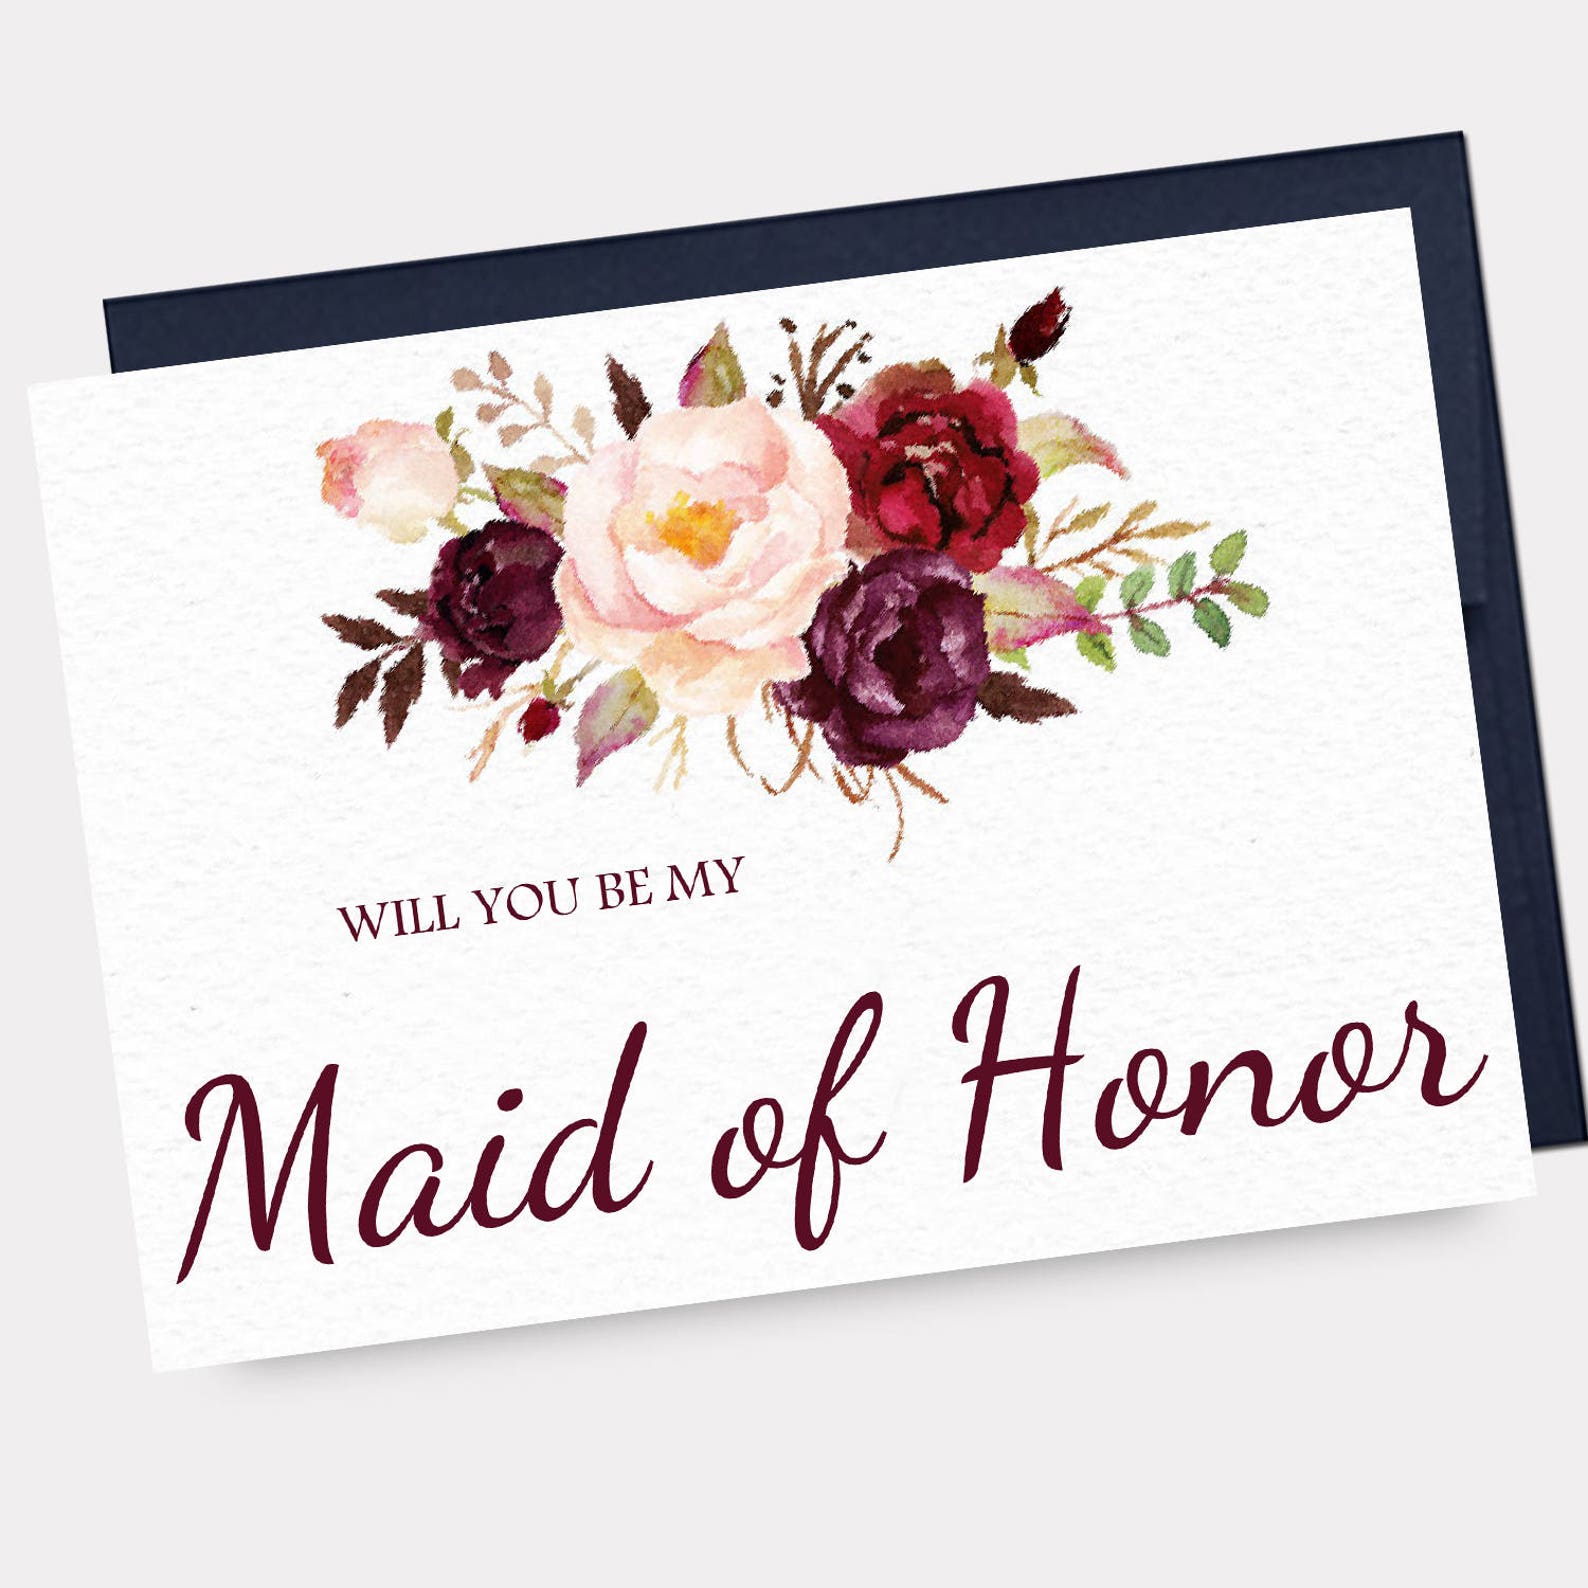 will-you-be-my-maid-of-honor-card-printable-asking-card-etsy